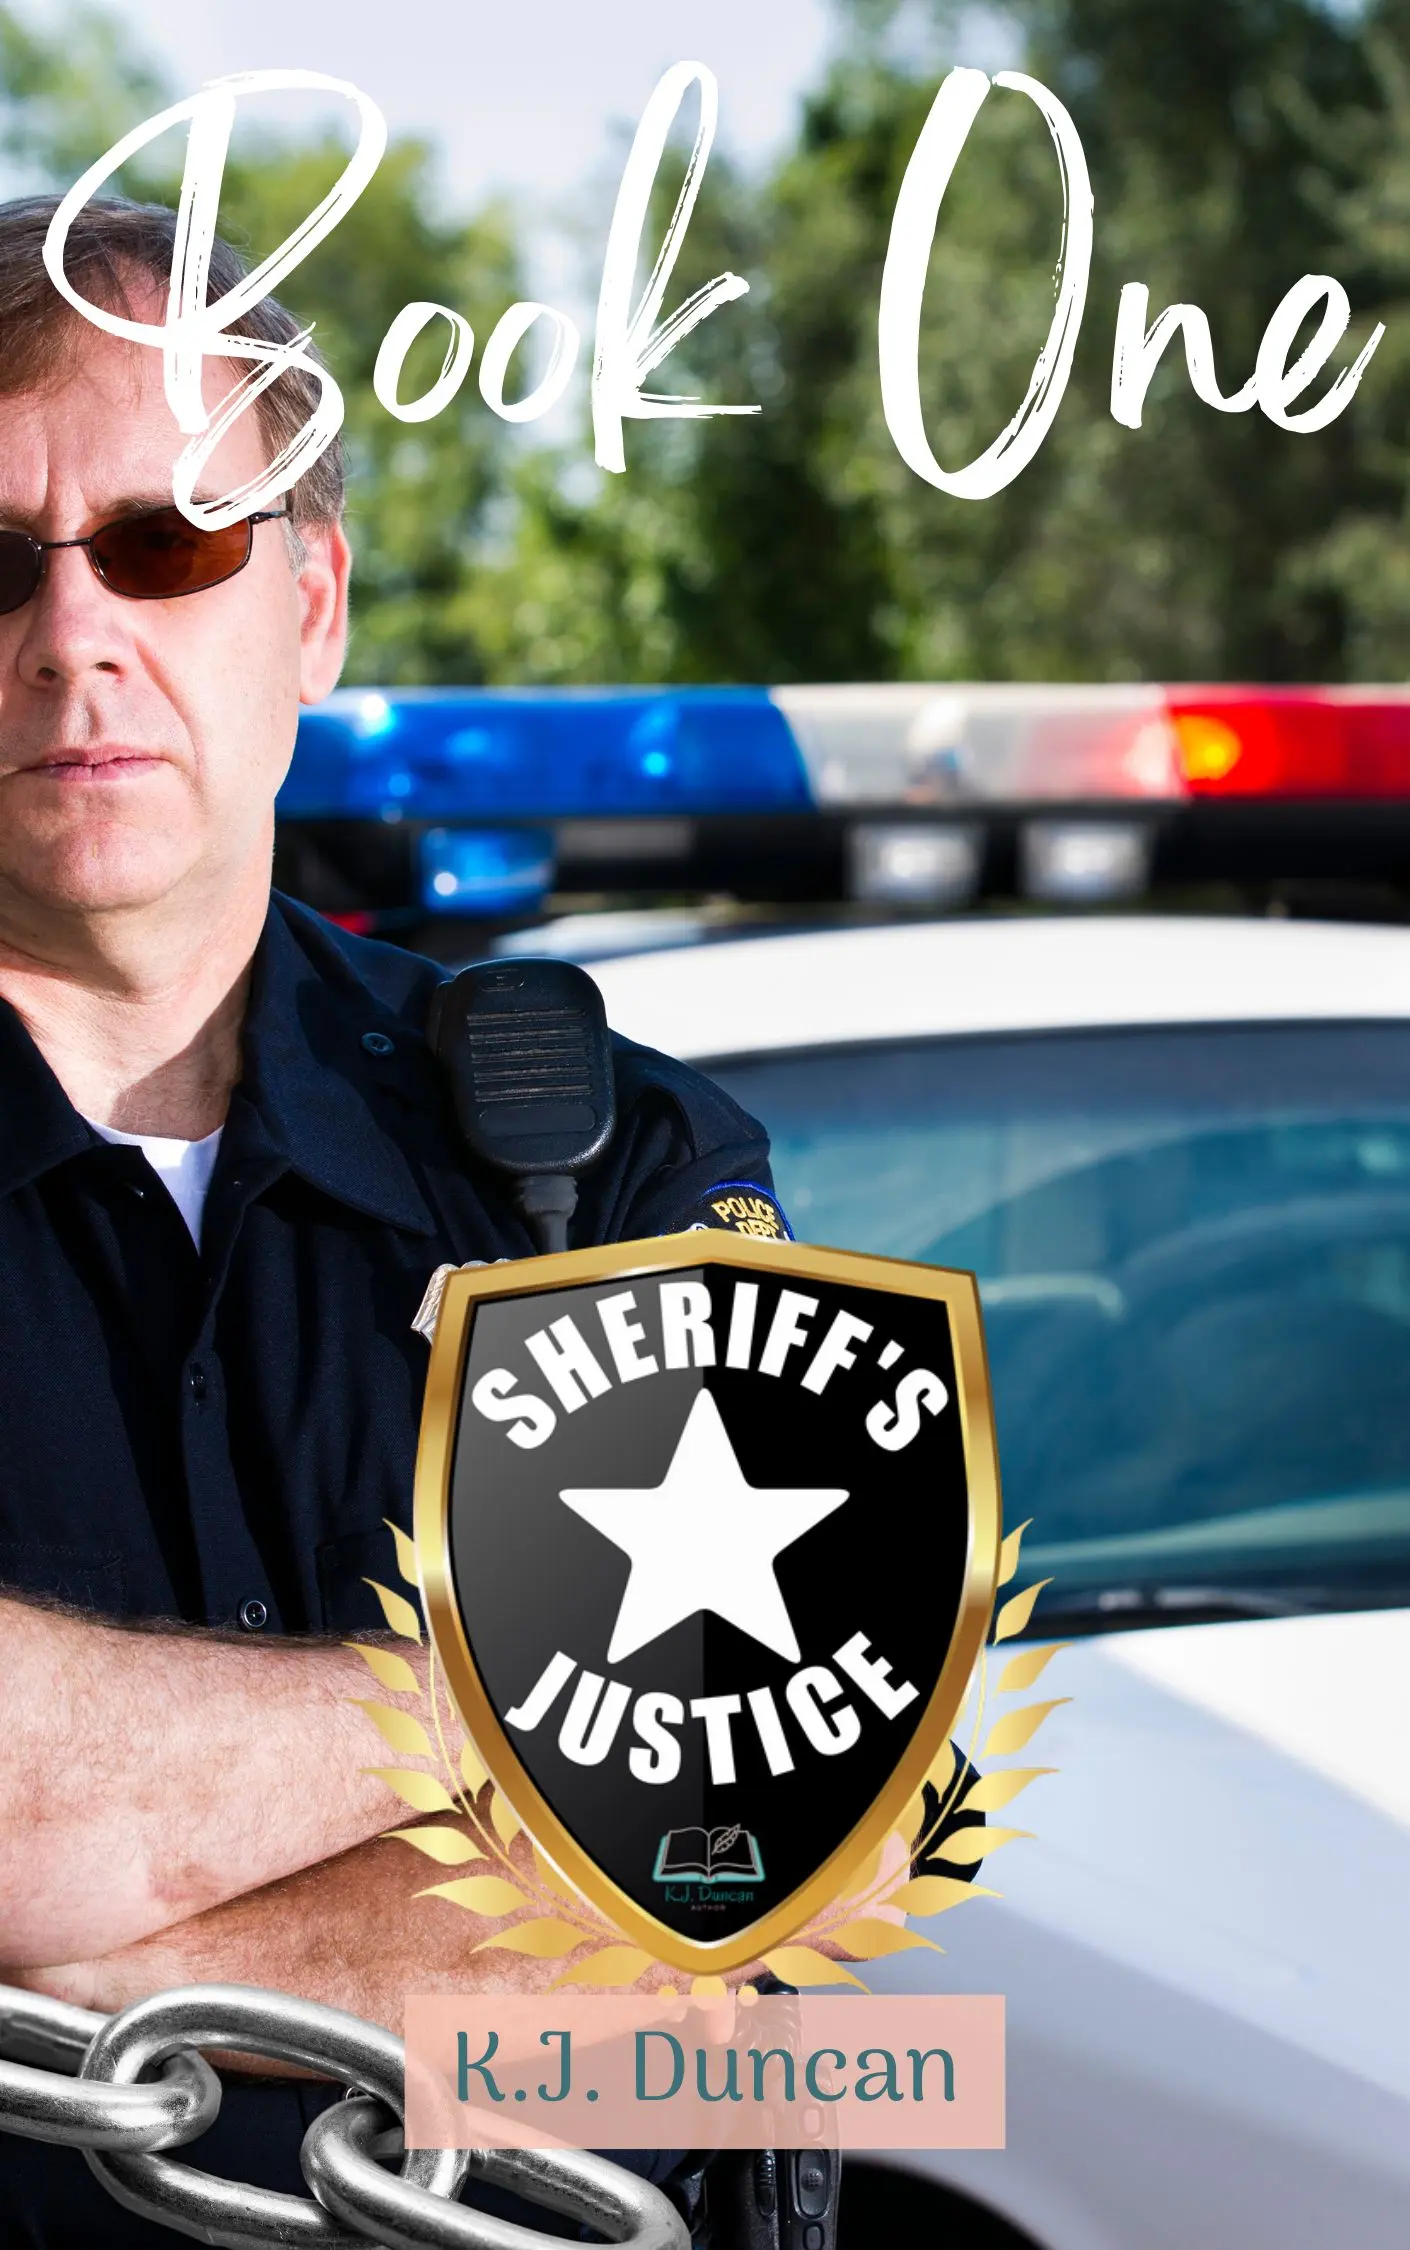 Sheriff's Justice: Book One cover of cop by his car